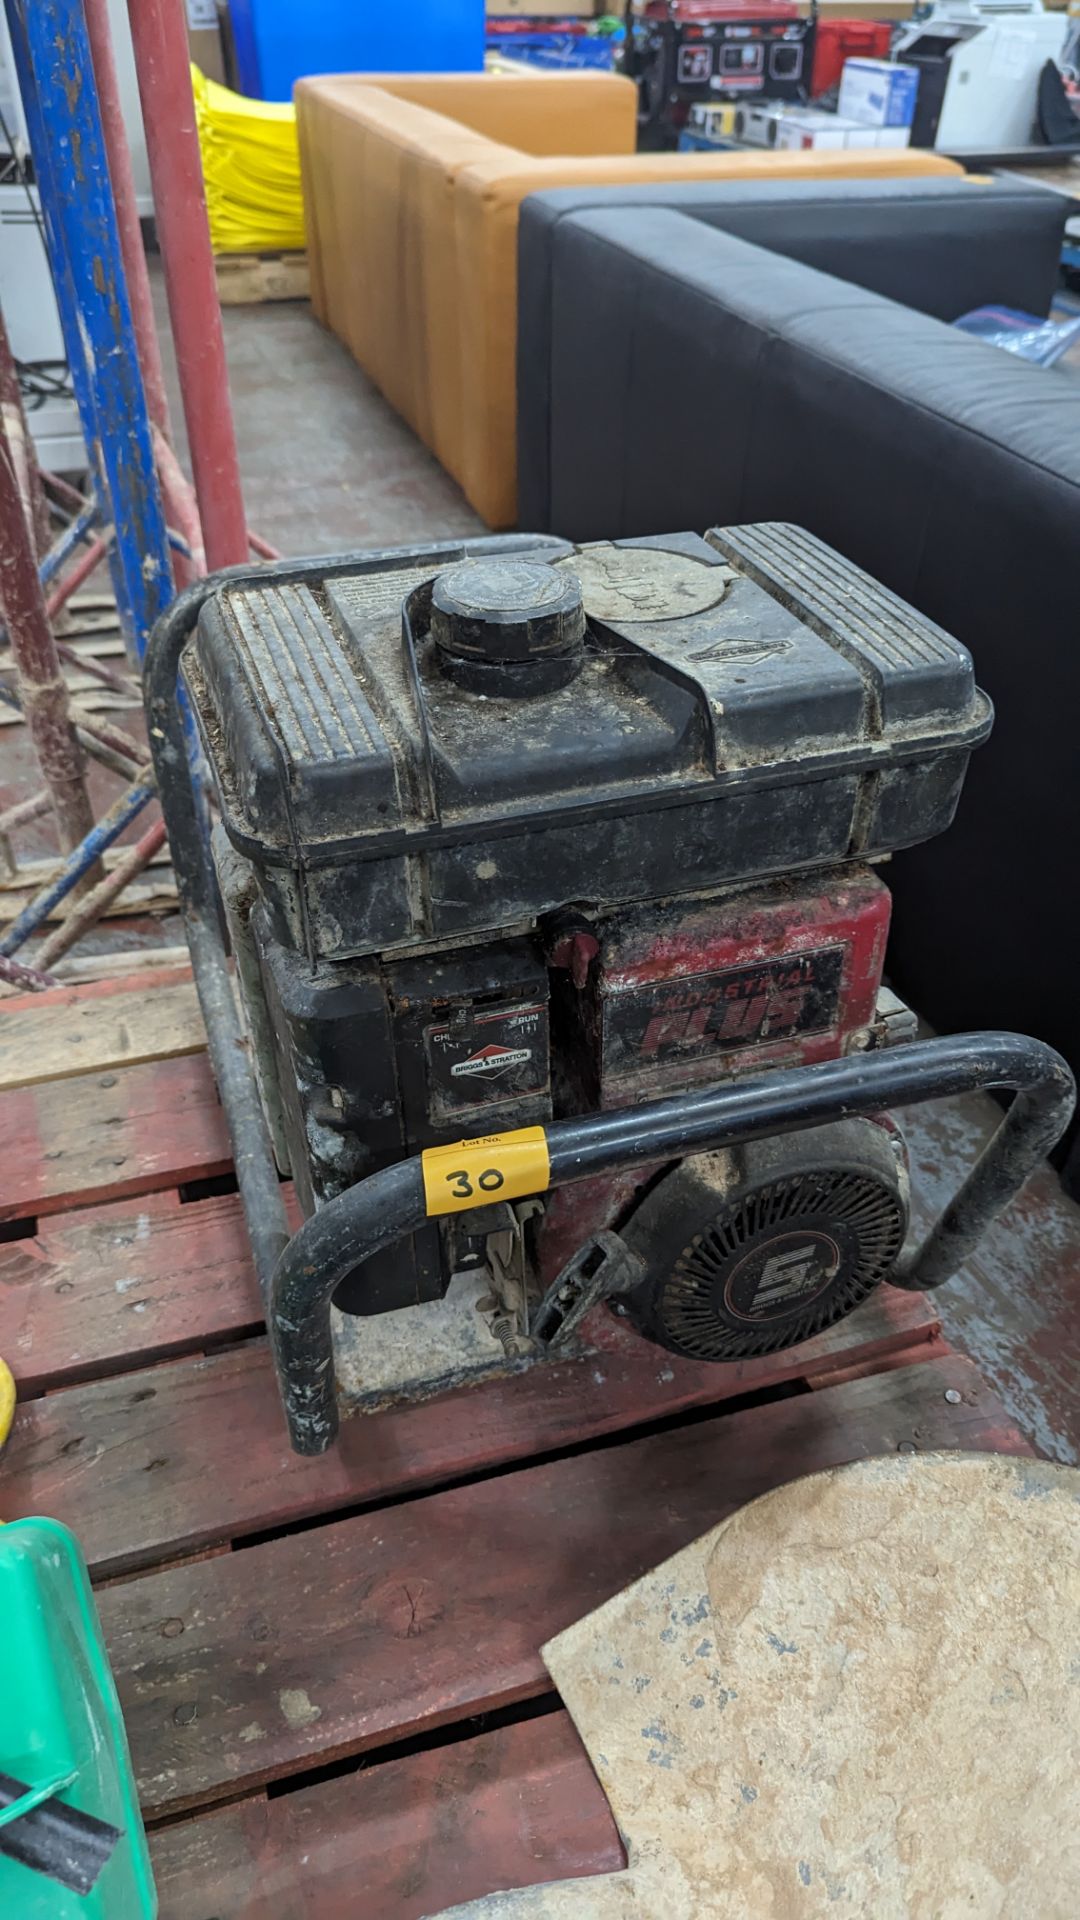 Twin socket 5hp industrial generator by Briggs & Stratton - Image 7 of 11